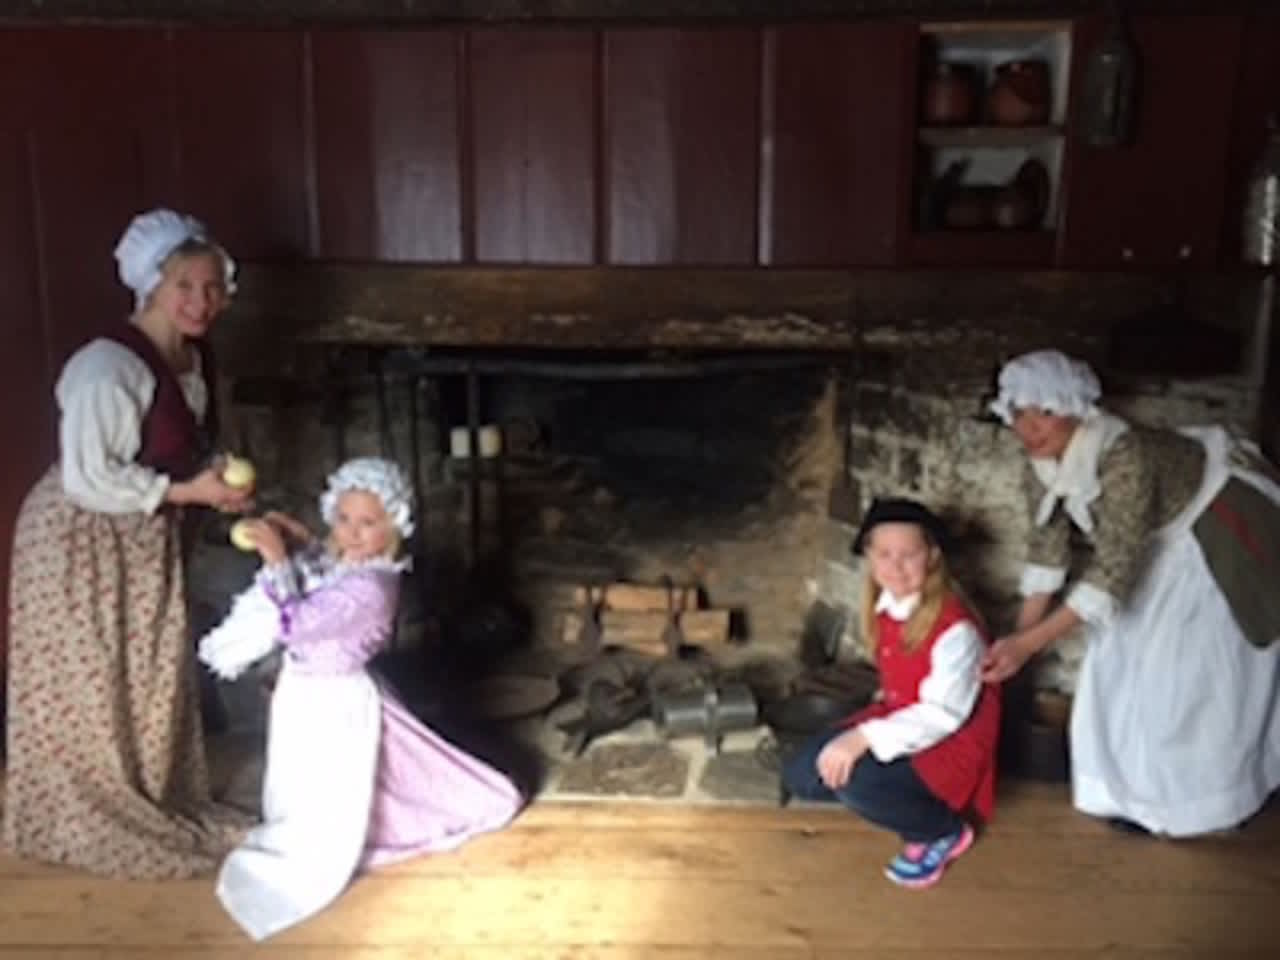 Colonial Cookery and Customs for Kids at the Wilton Historical Society